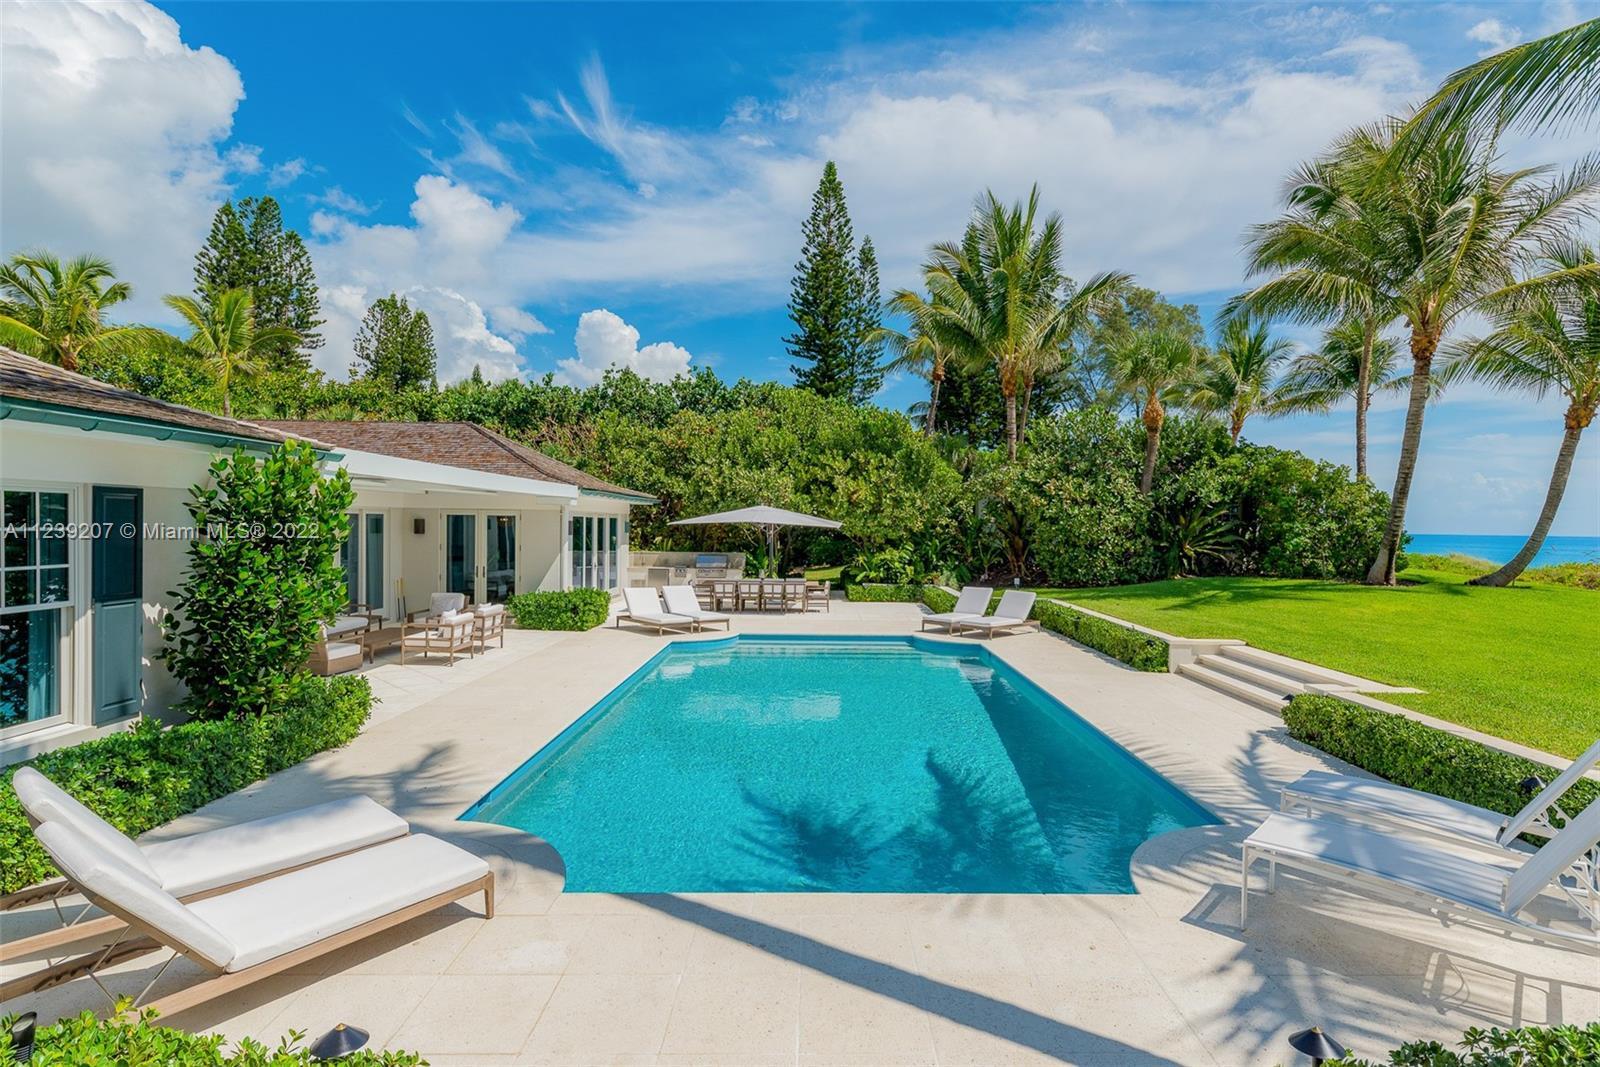 Direct oceanfront 1.53-acre one-of-a-kind Jupiter Island estate with a sprawling 200' of beach front